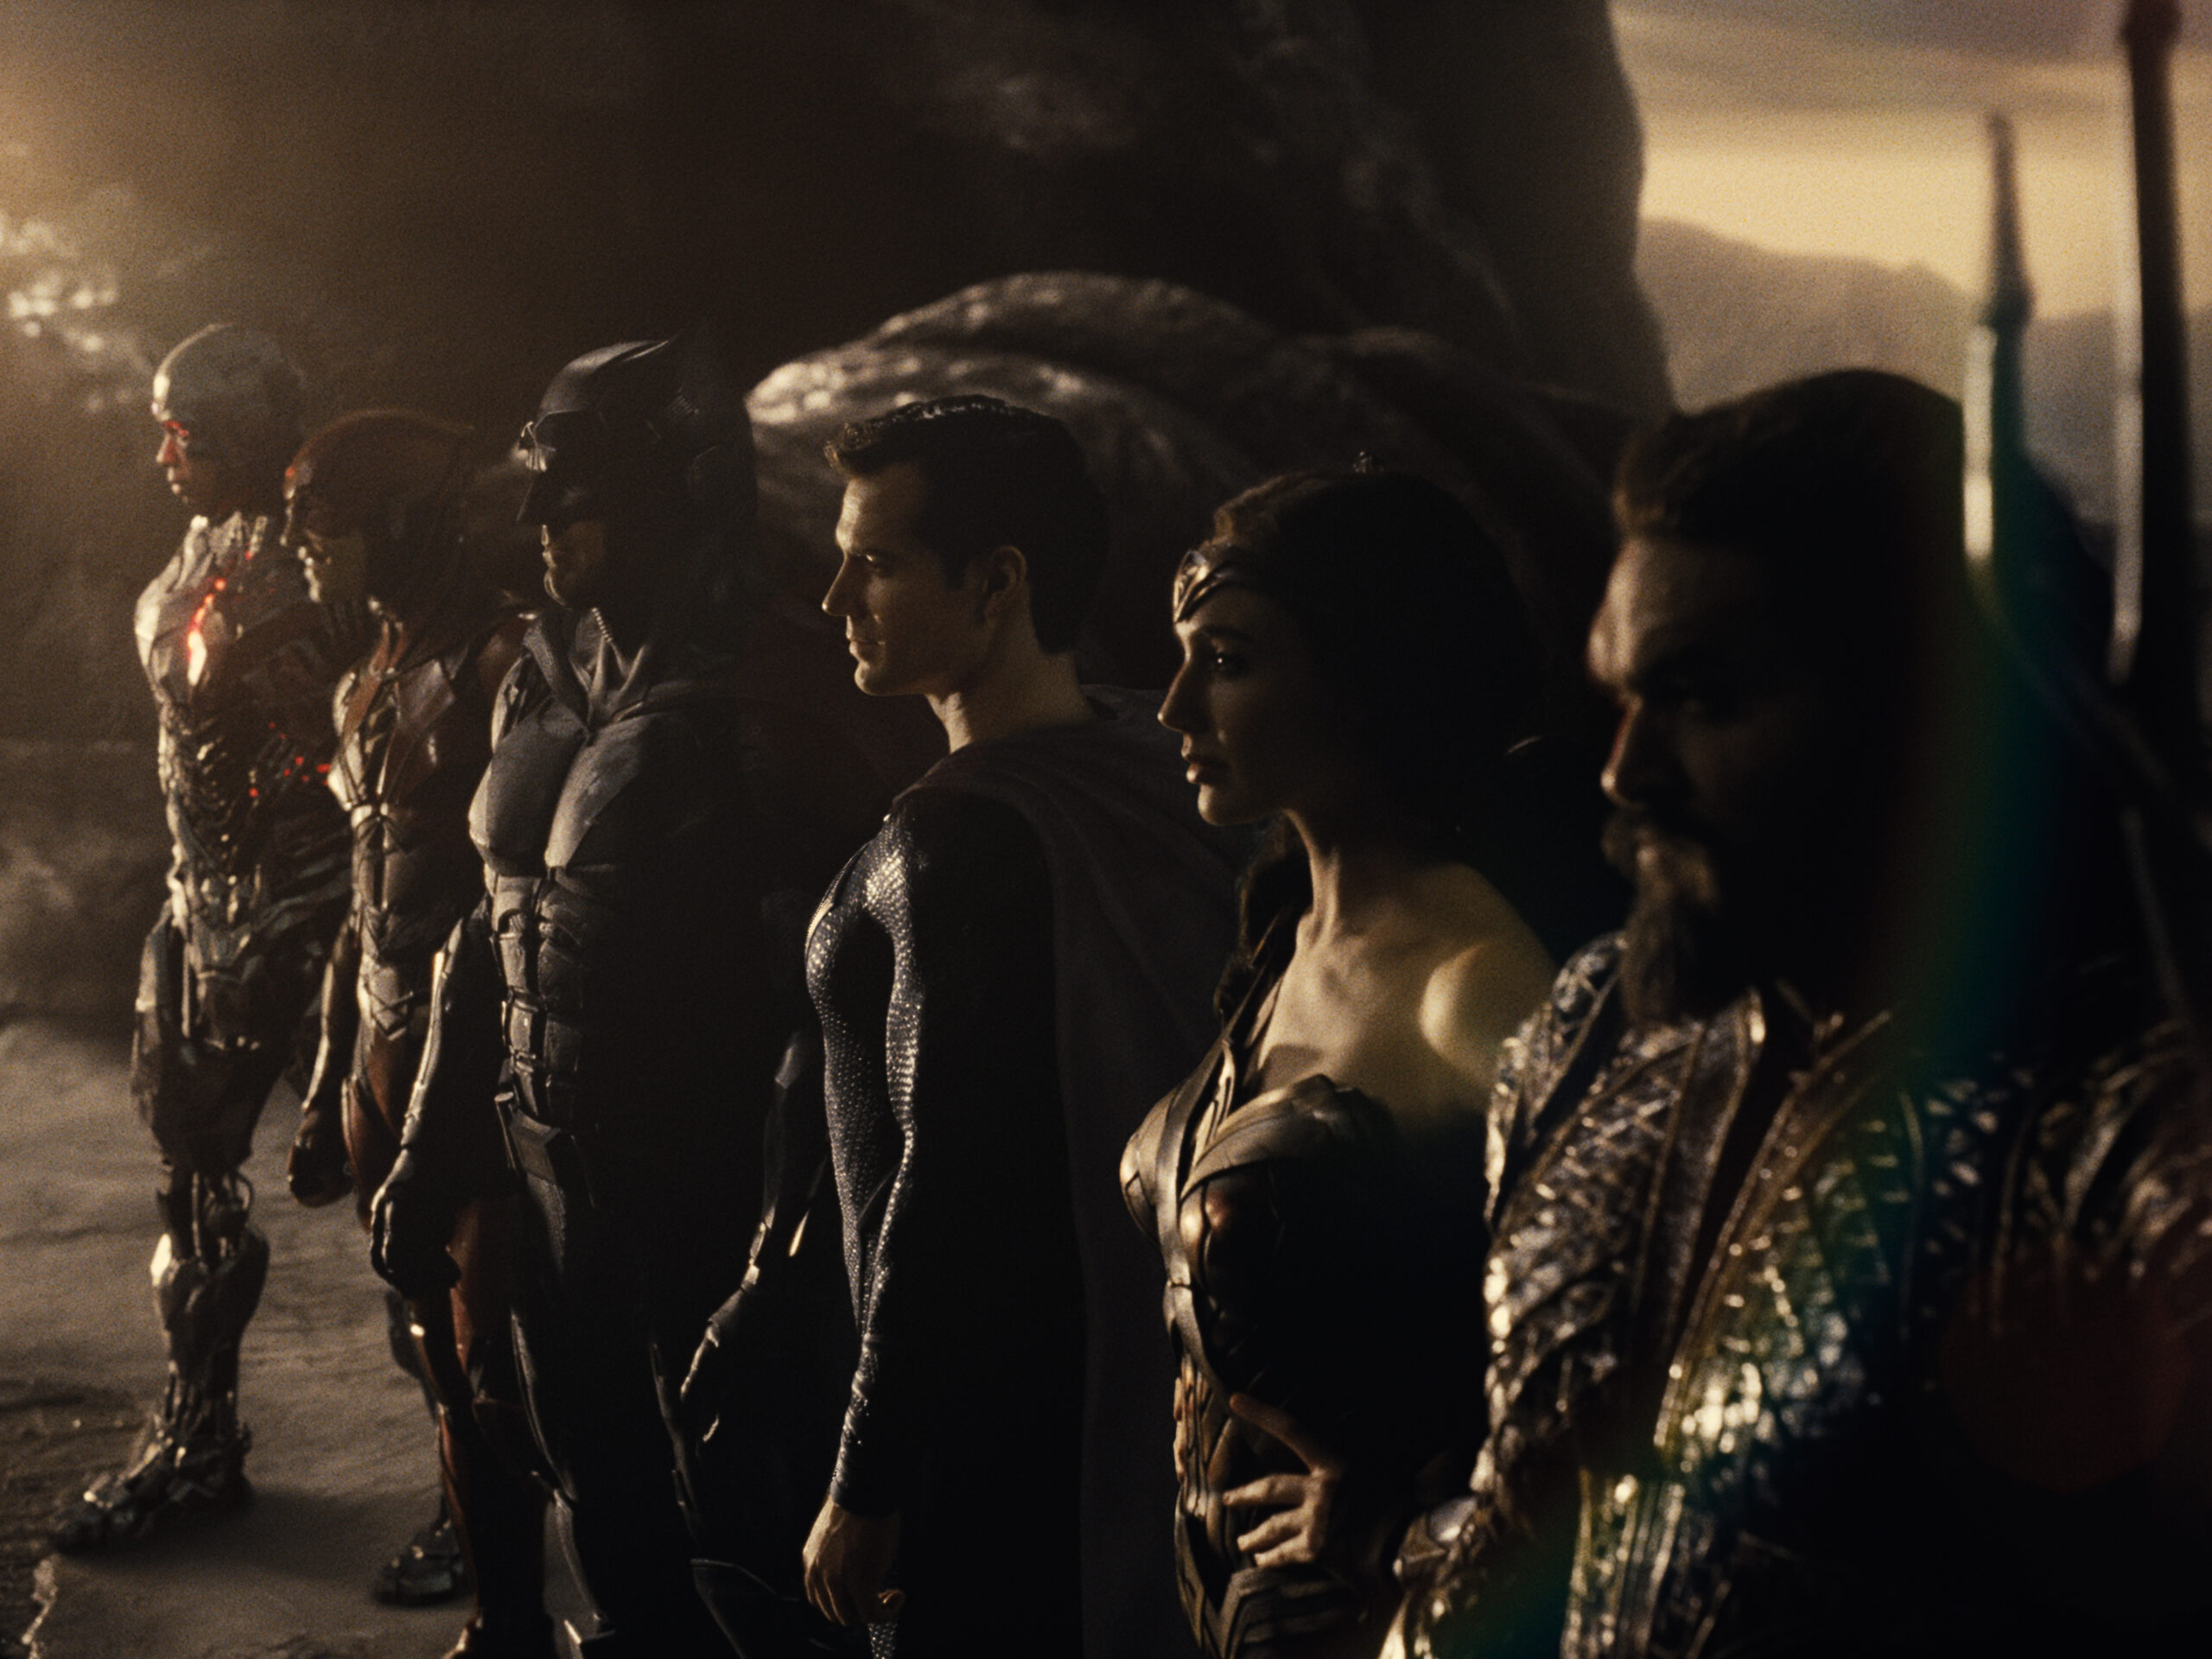 FILM REVIEW: ZACK SNYDER’S JUSTICE LEAGUE